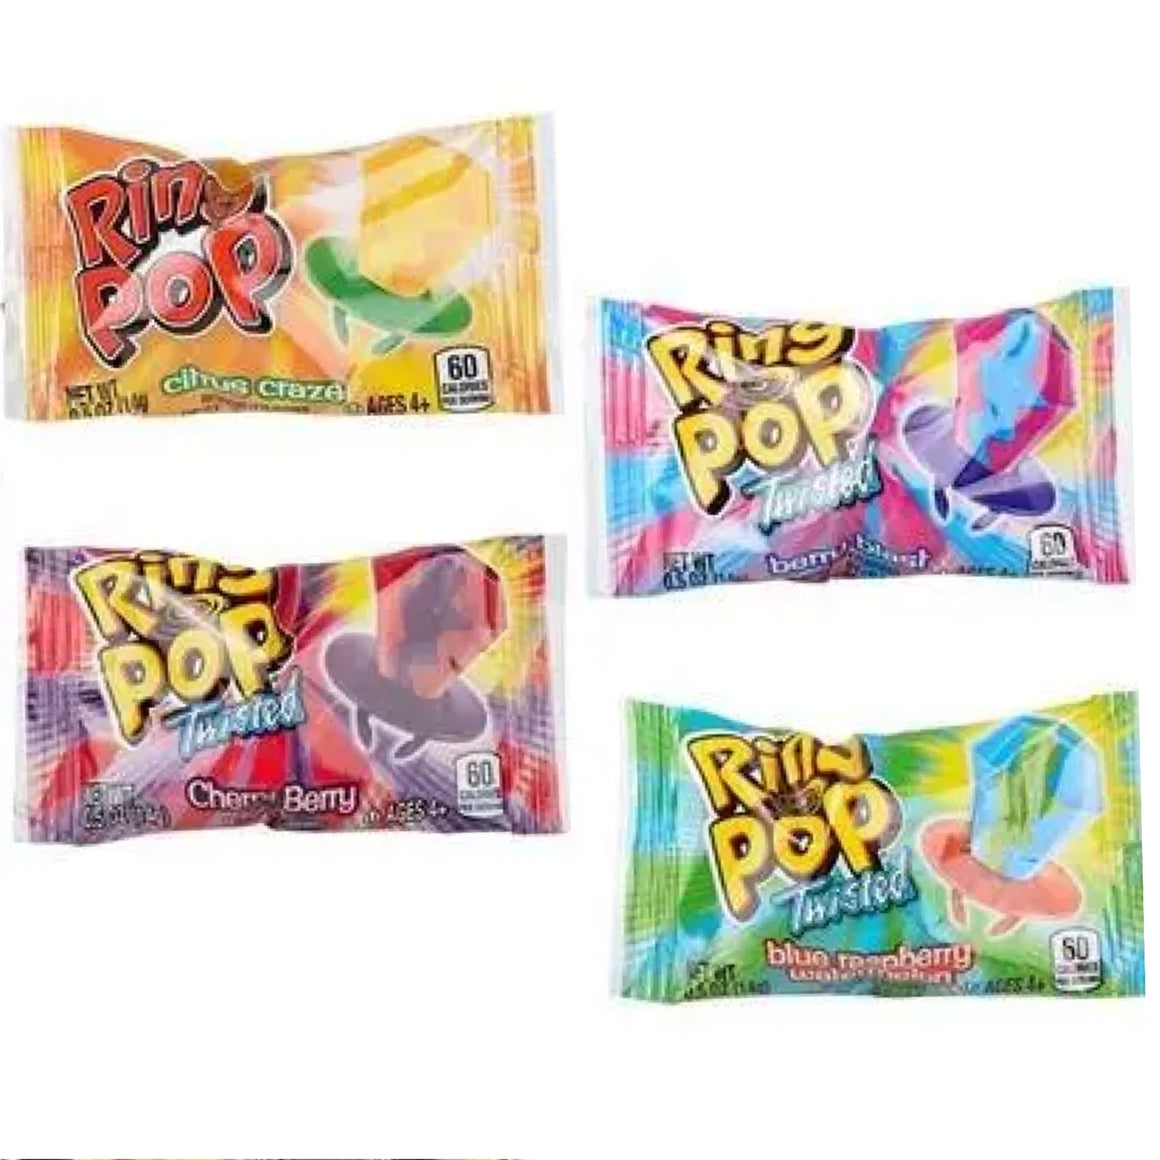 RETRO CANDY - RING POPS TWISTED